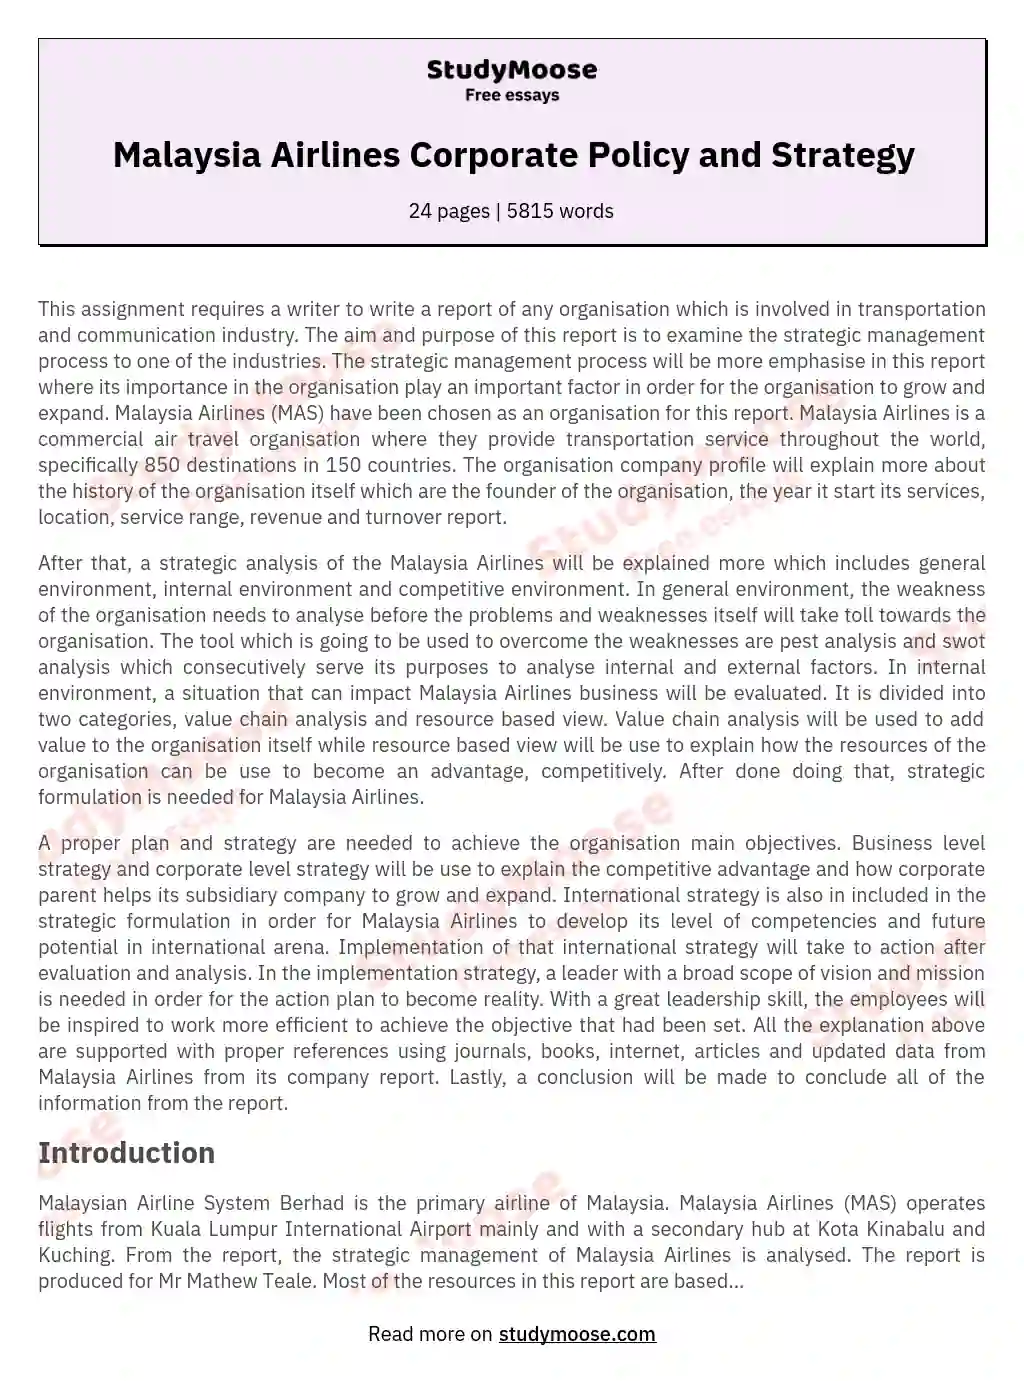 Malaysia Airlines Corporate Policy and Strategy essay